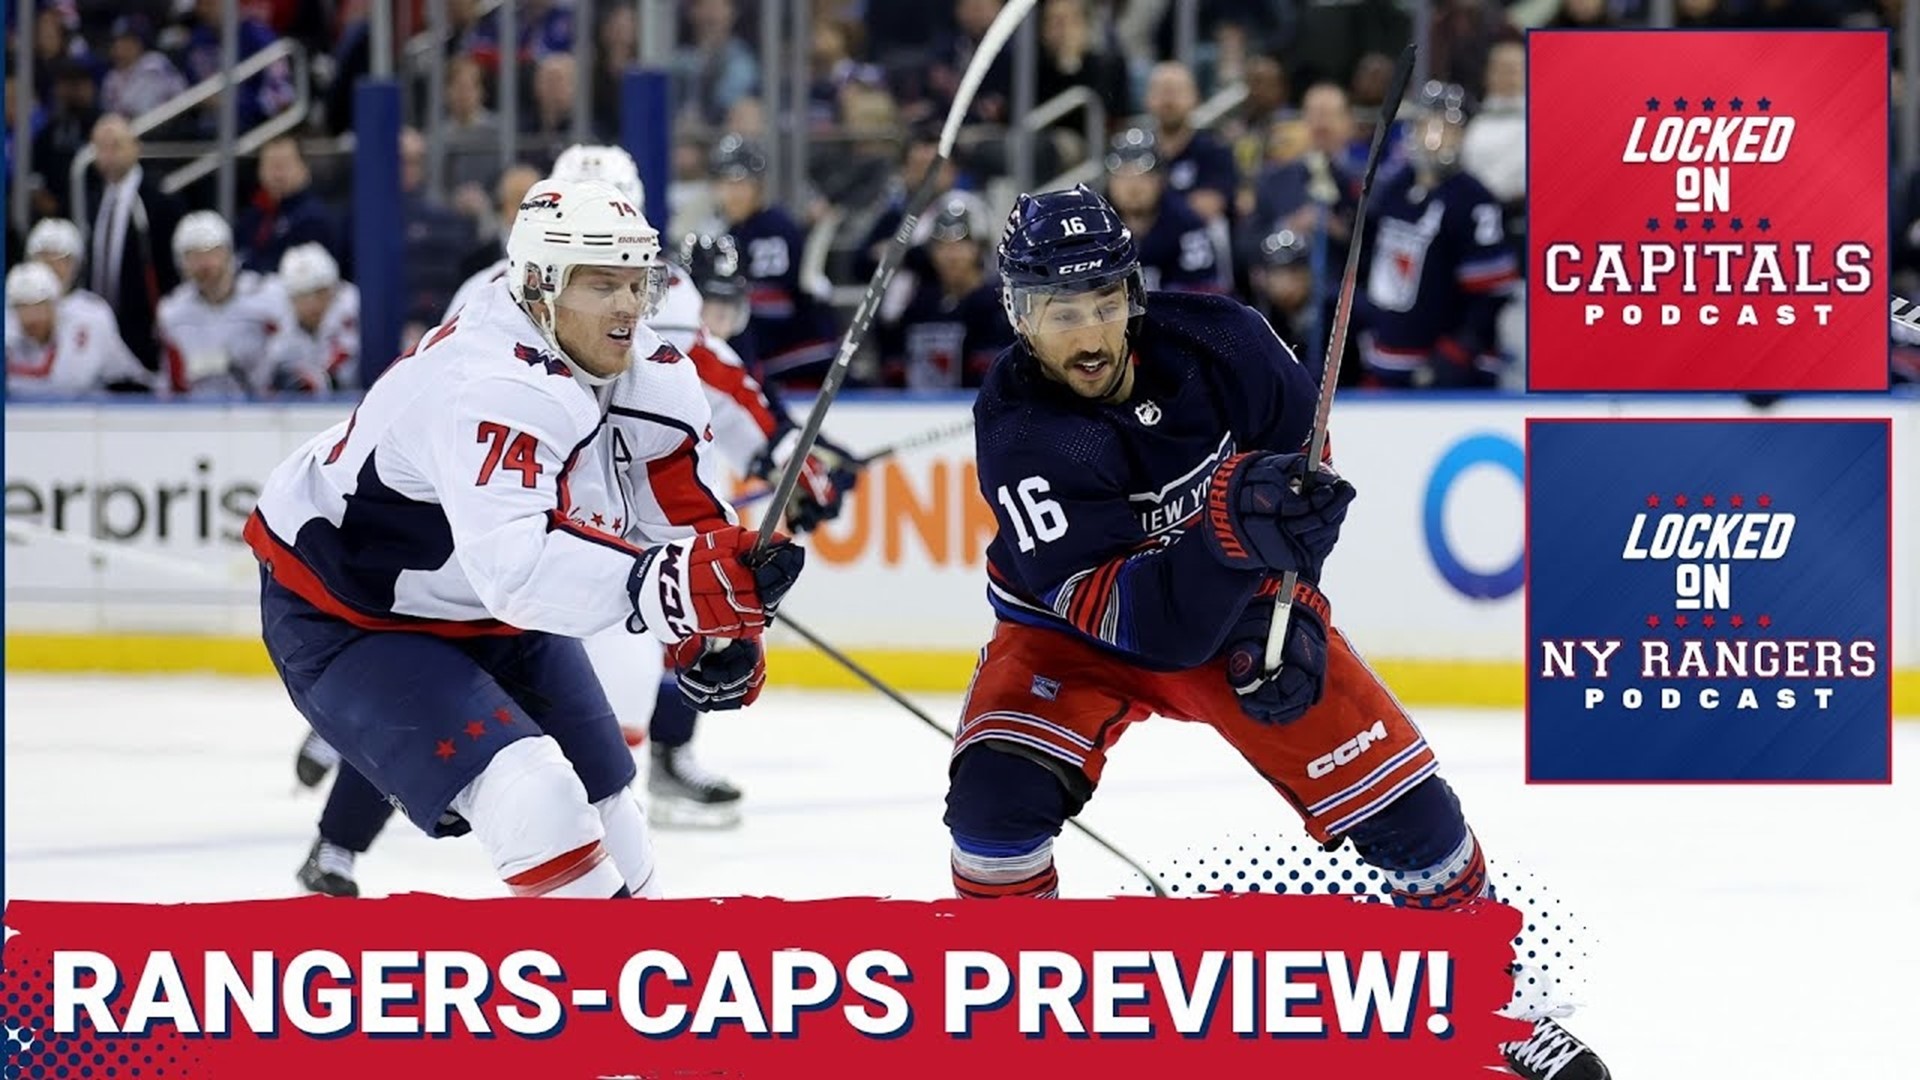 In this special crossover edition of Locked on Capitals/Rangers Dan talks about the Capitals vs The Rangers and what to expect.